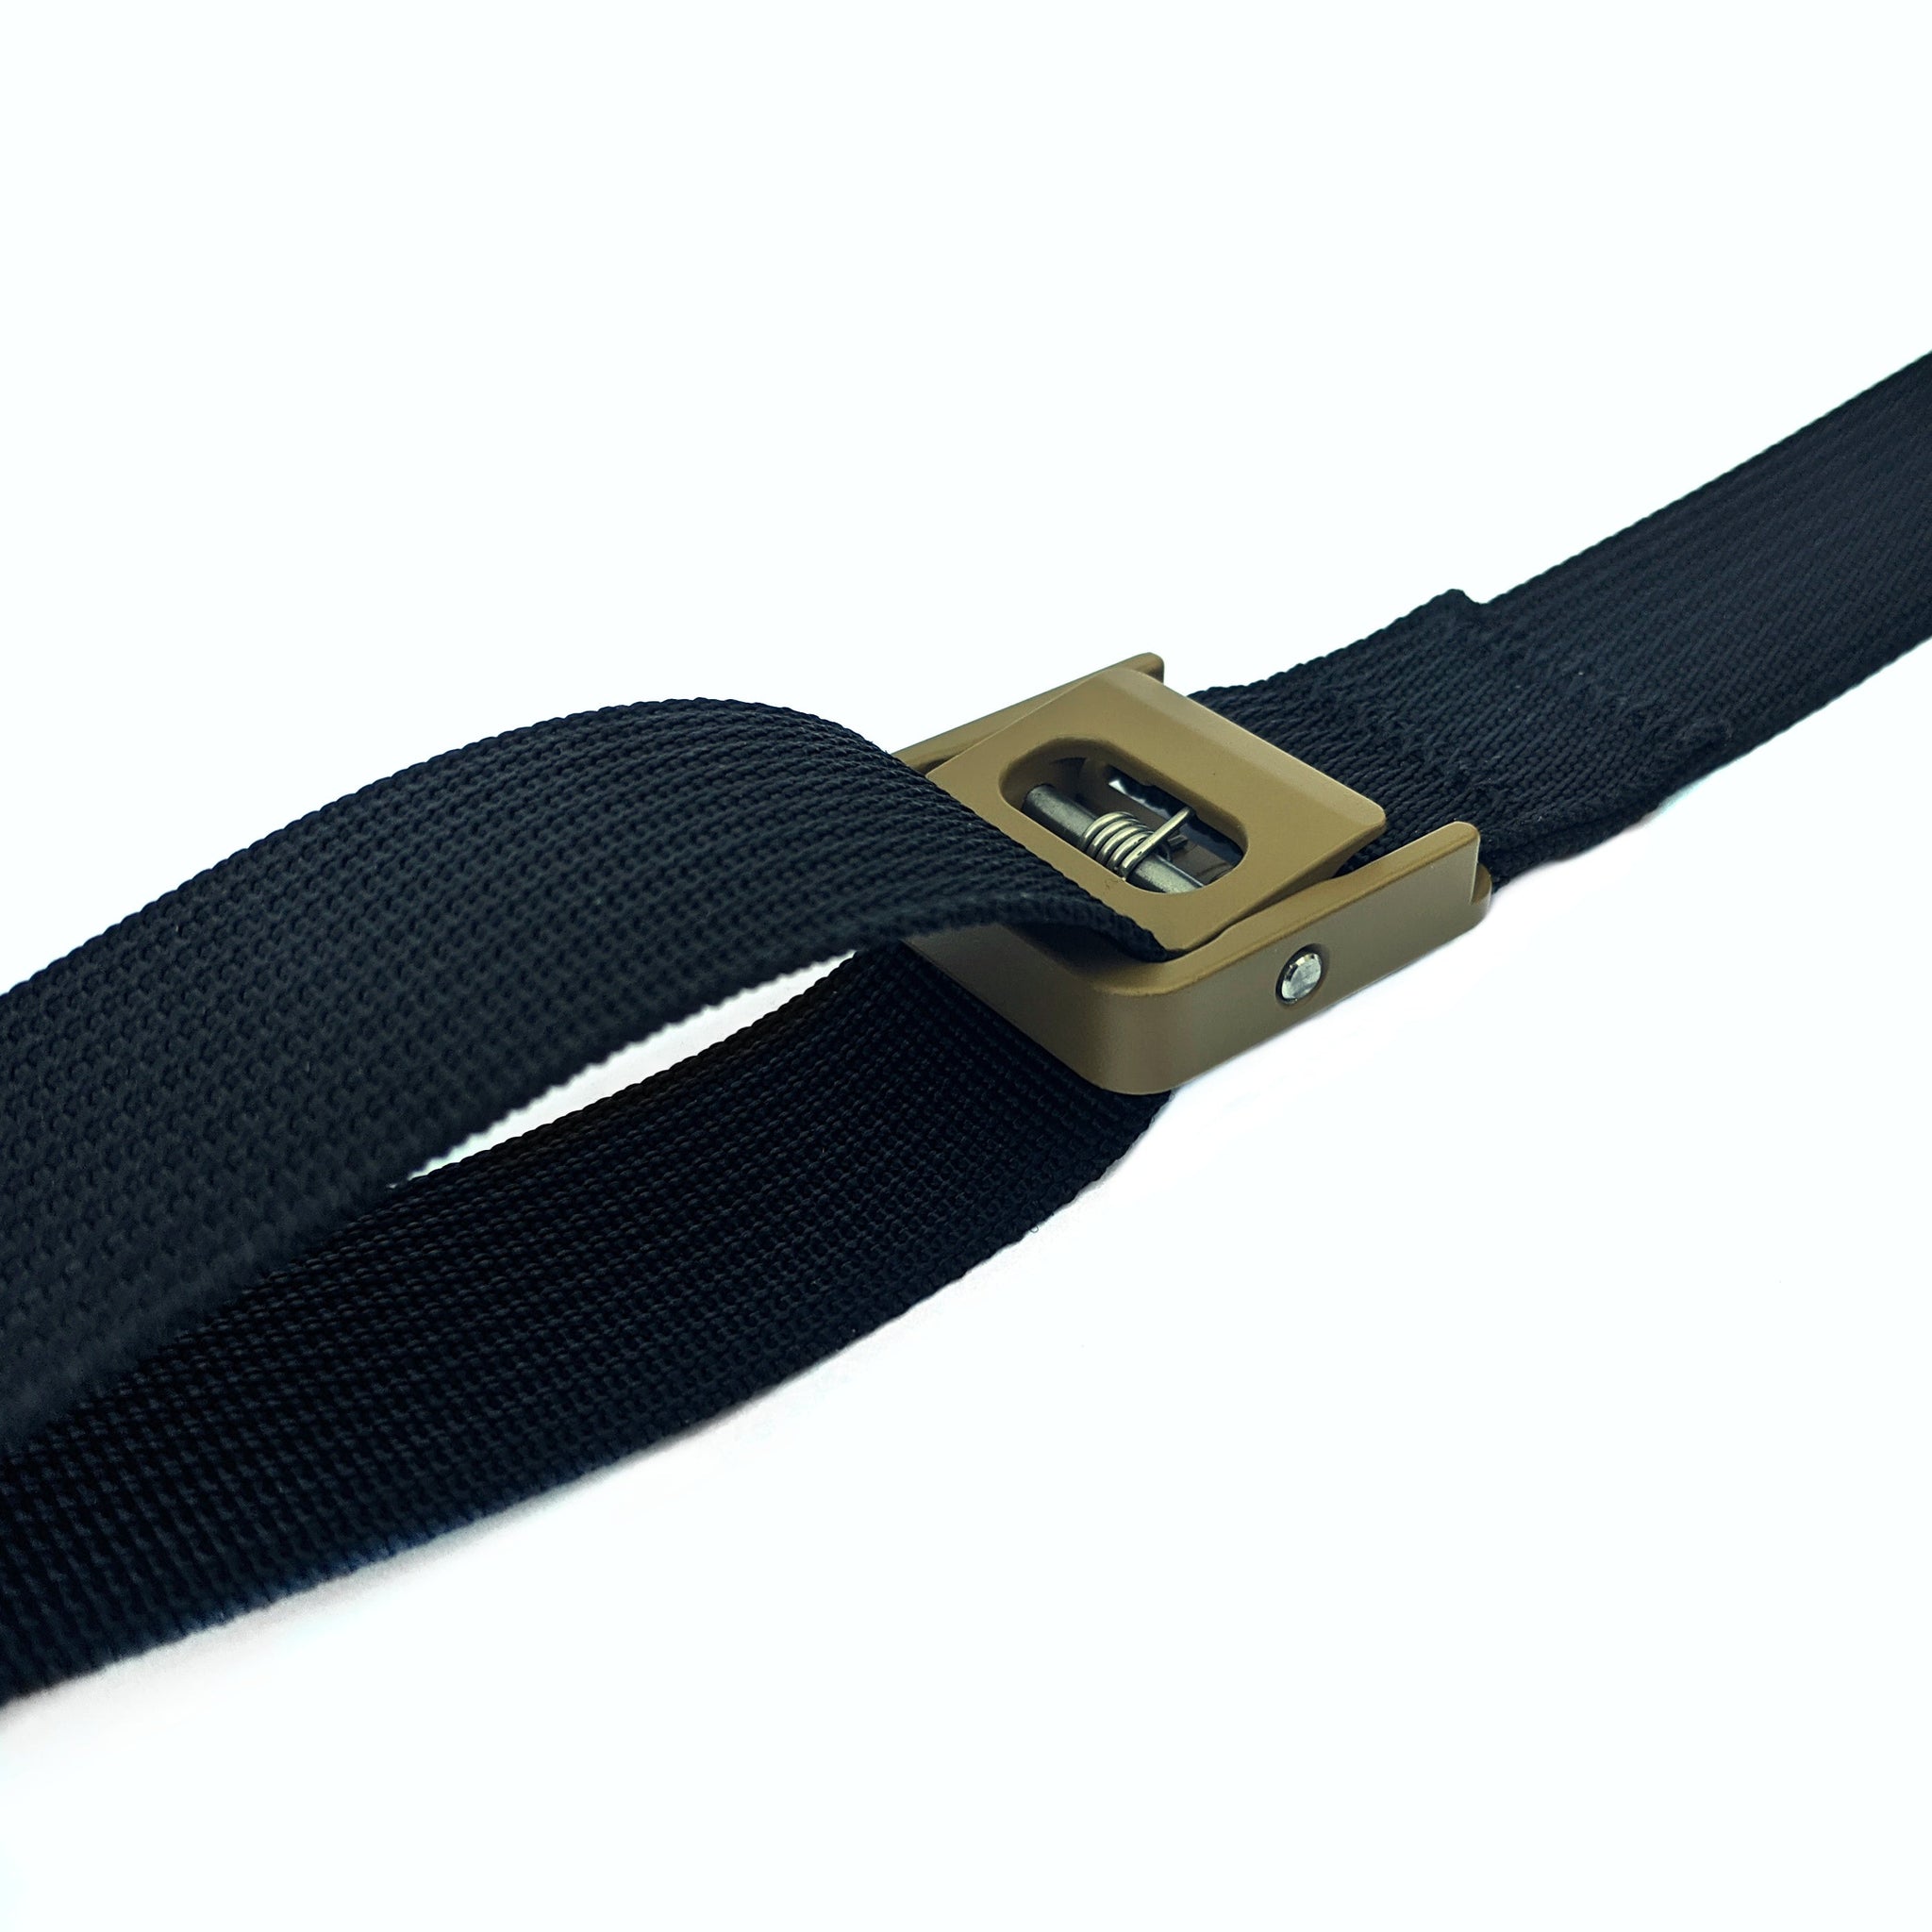 These Austere Manufacturing Cam Straps Have Buckles Fit For NASA! -  Bikerumor